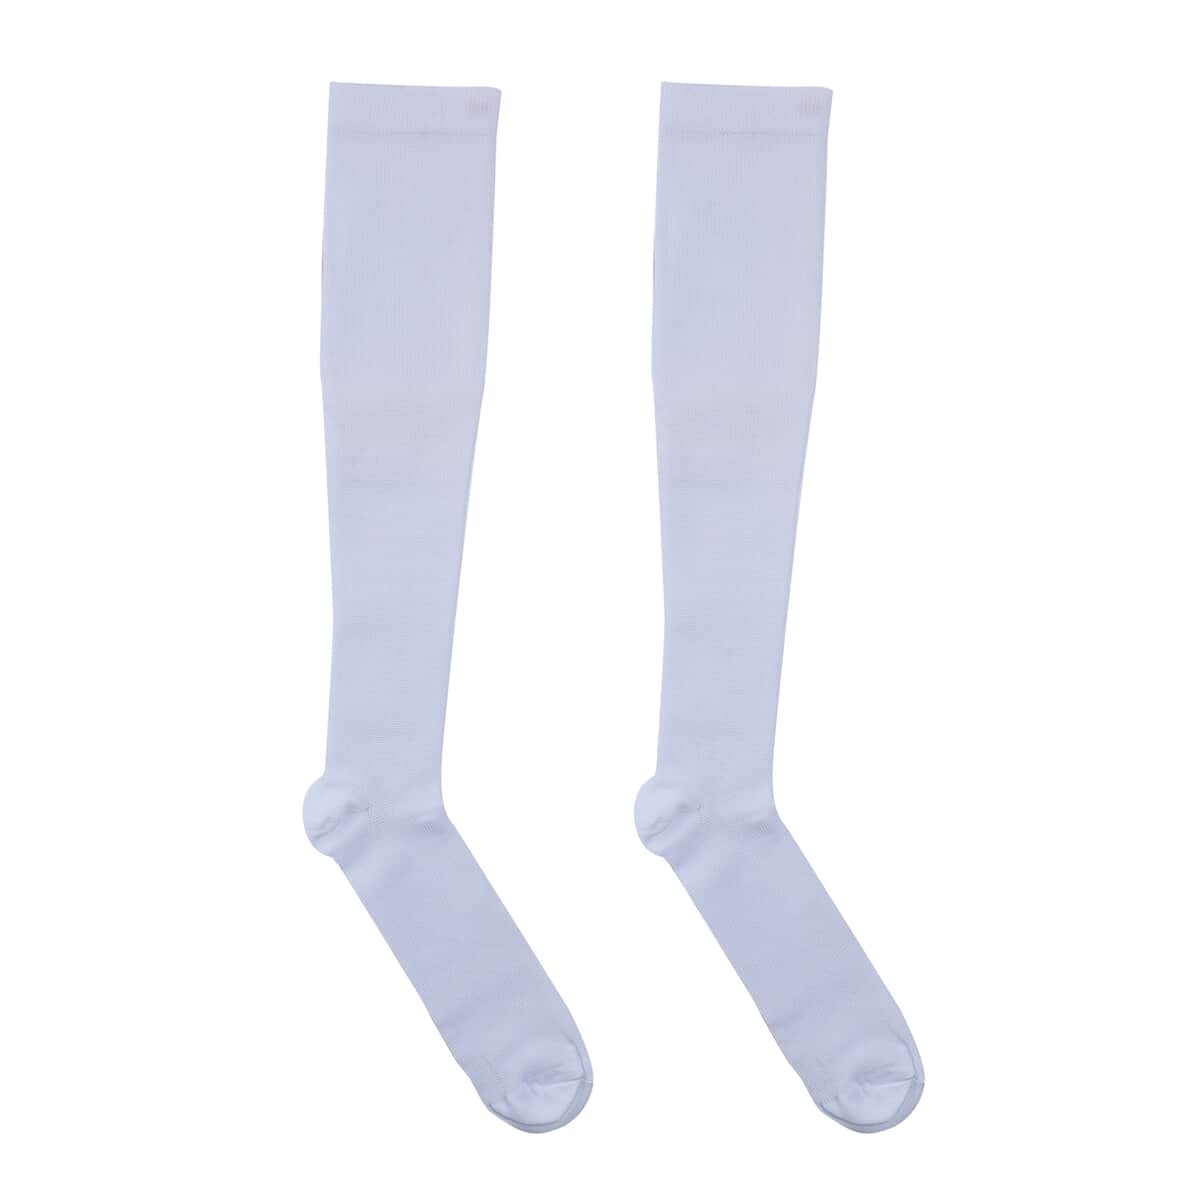 Set of 4 Pairs Knee Length Copper Infused Compression Socks - Classic Multi Color (S/M) image number 3